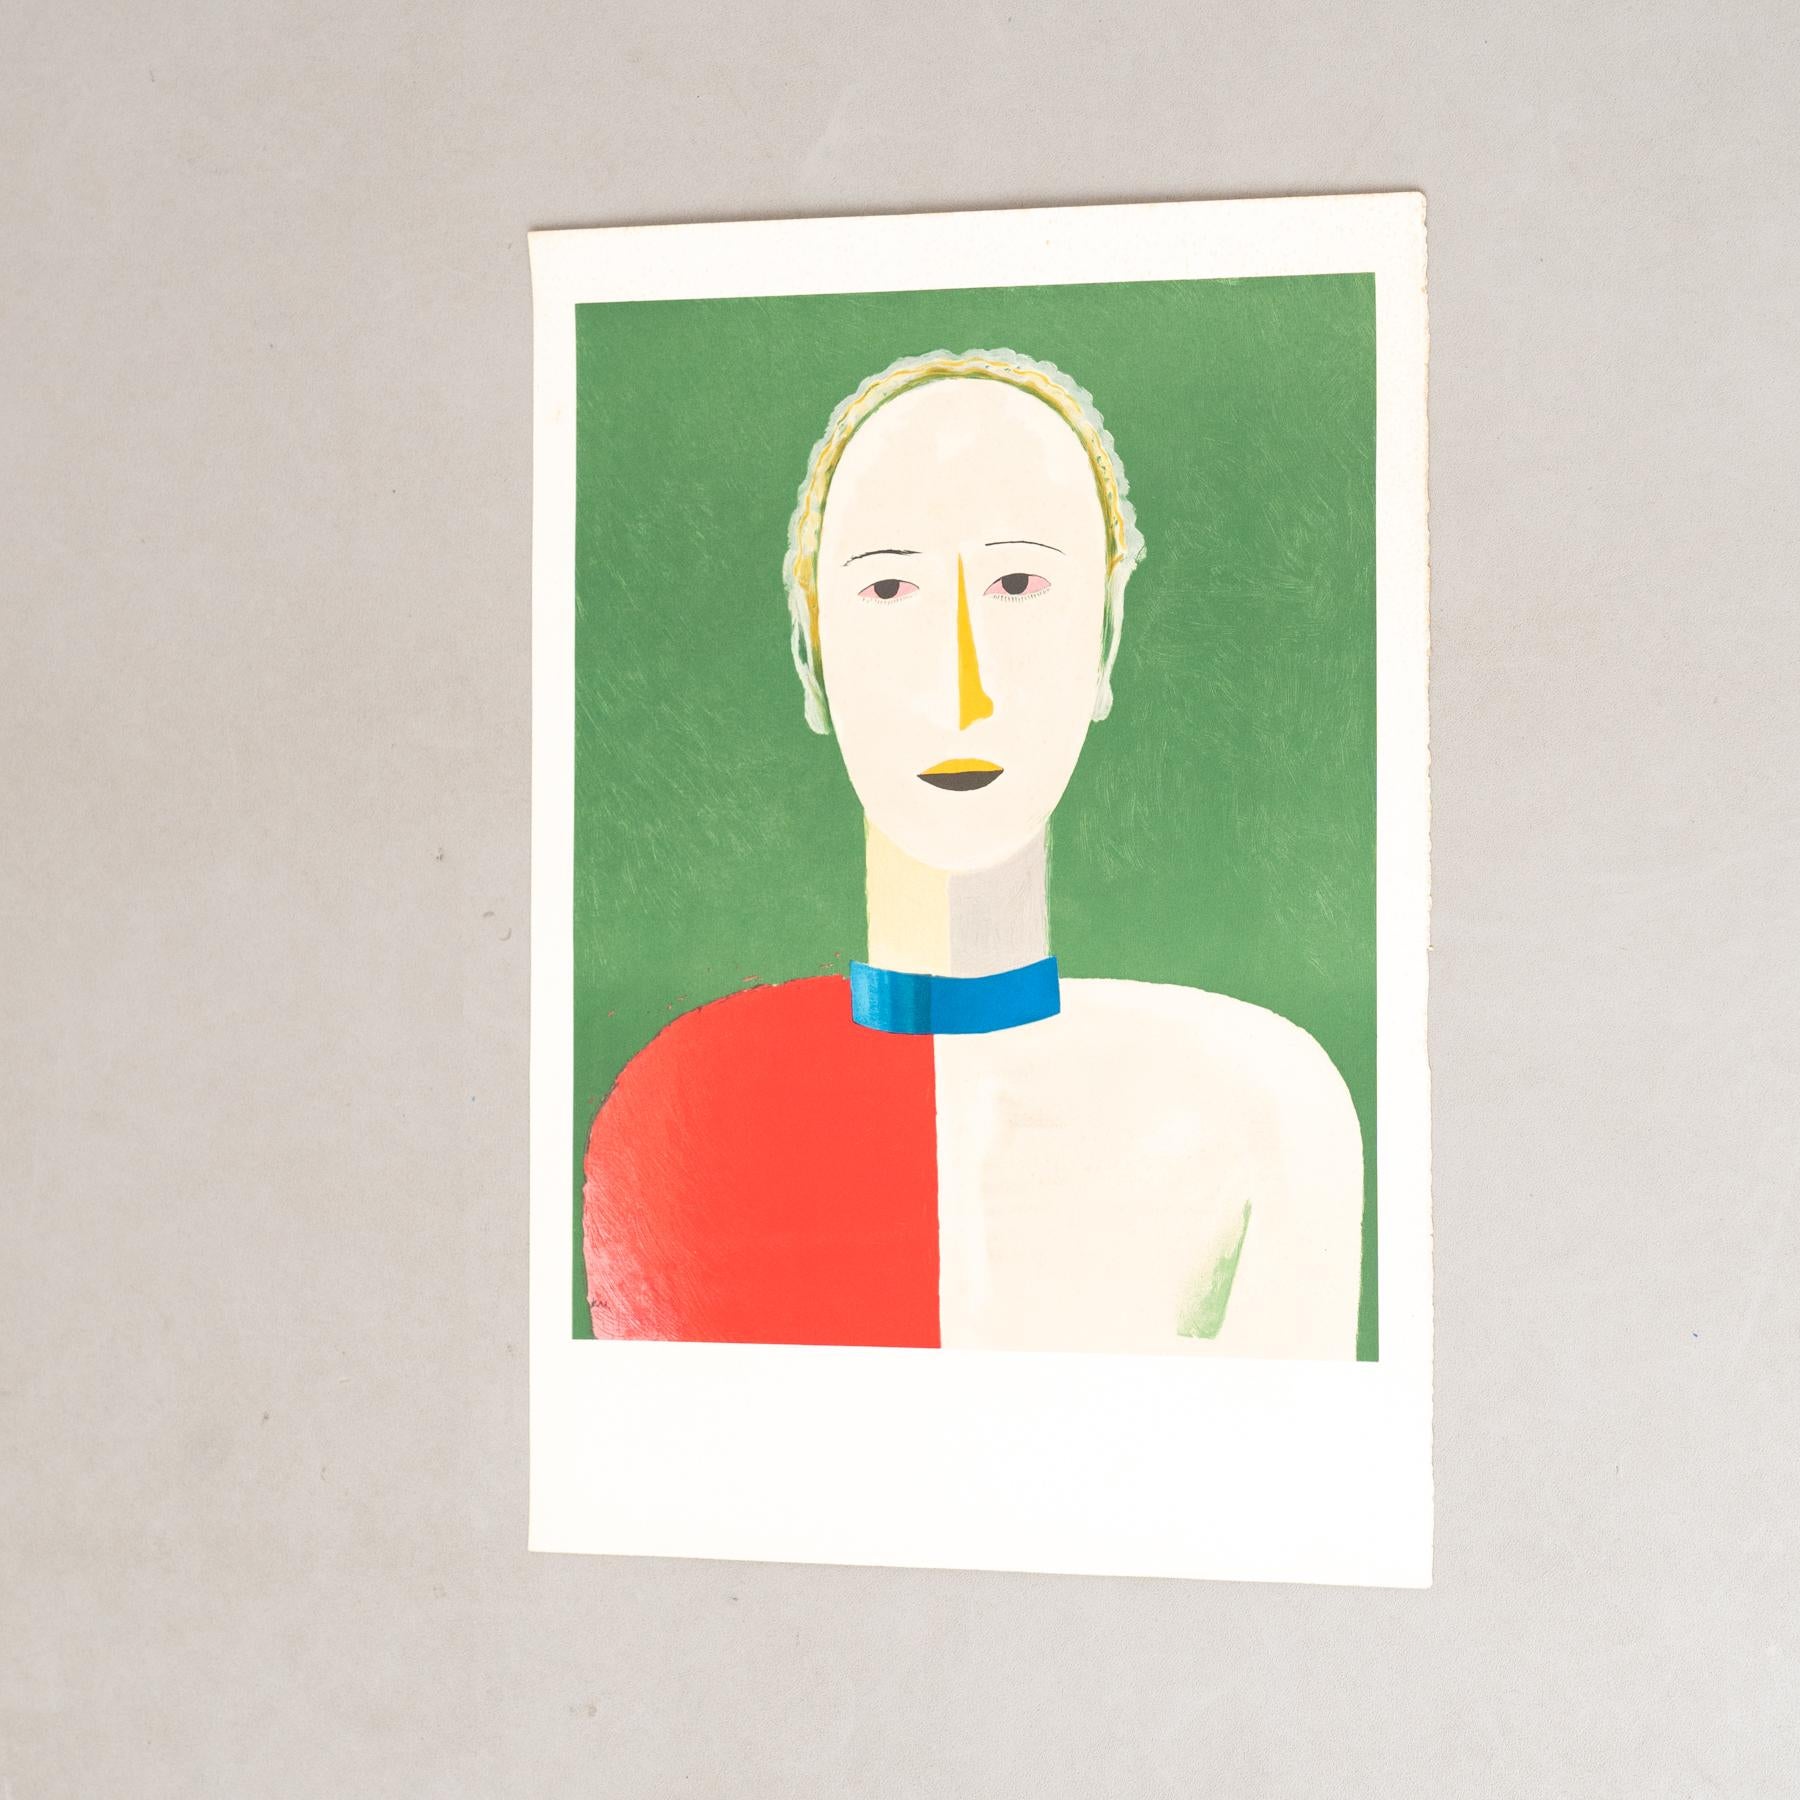 Lithograph after Kazimir Severínovich Malevich’s painting 'Portrait of a Female', 1928-1932.

Printed by Atelier Mourlot, the famed Parisian printers noted for their close collaboration with artists.
Commissioned by the Galerie Gerard Piltzer